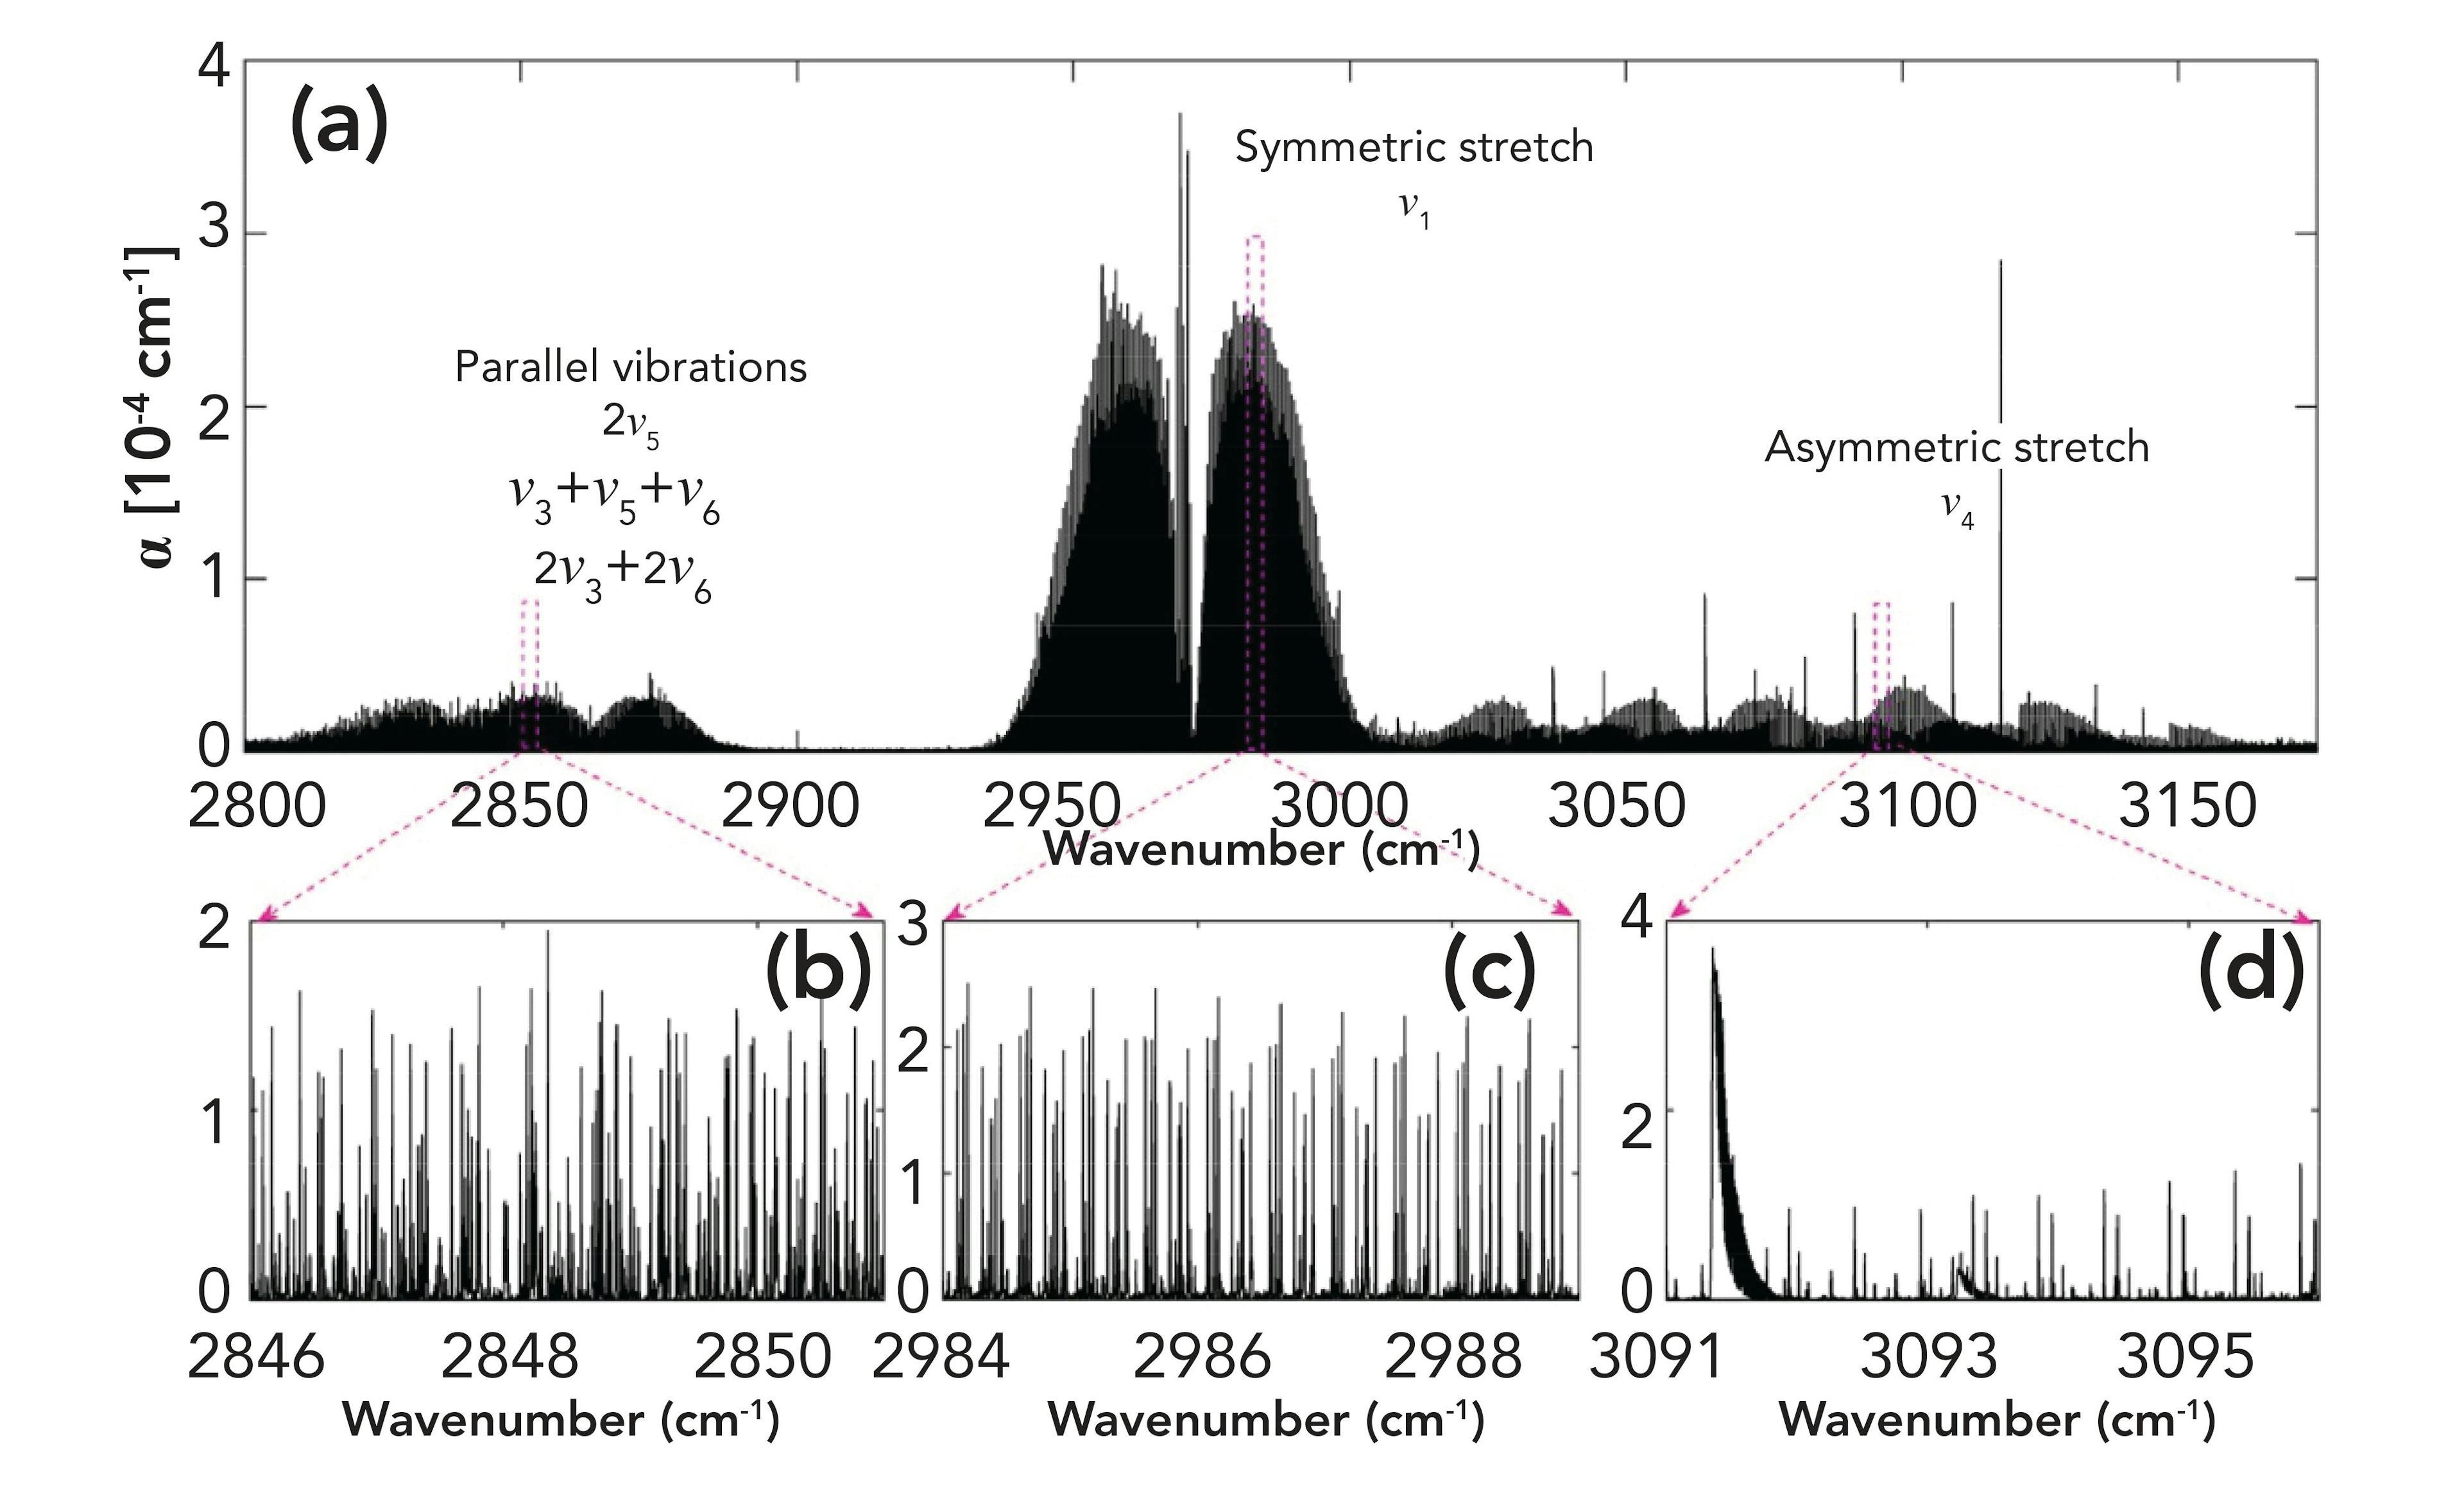 FIGURE 3: (a) Overview of the broadband high-resolution spectrum of pure CH3I measured at 0.03 mbar in the range from 2800 to 3160 cm-1. (b)-(d) The zoomed in spectra showing the dense ro-vibrational structures of the different bands. Spectra in panels (b) and (d) were measured at a pressure of 0.11 mbar to increase the absorption signal due to the lower intensity compared to the ν1 band in panel (c).